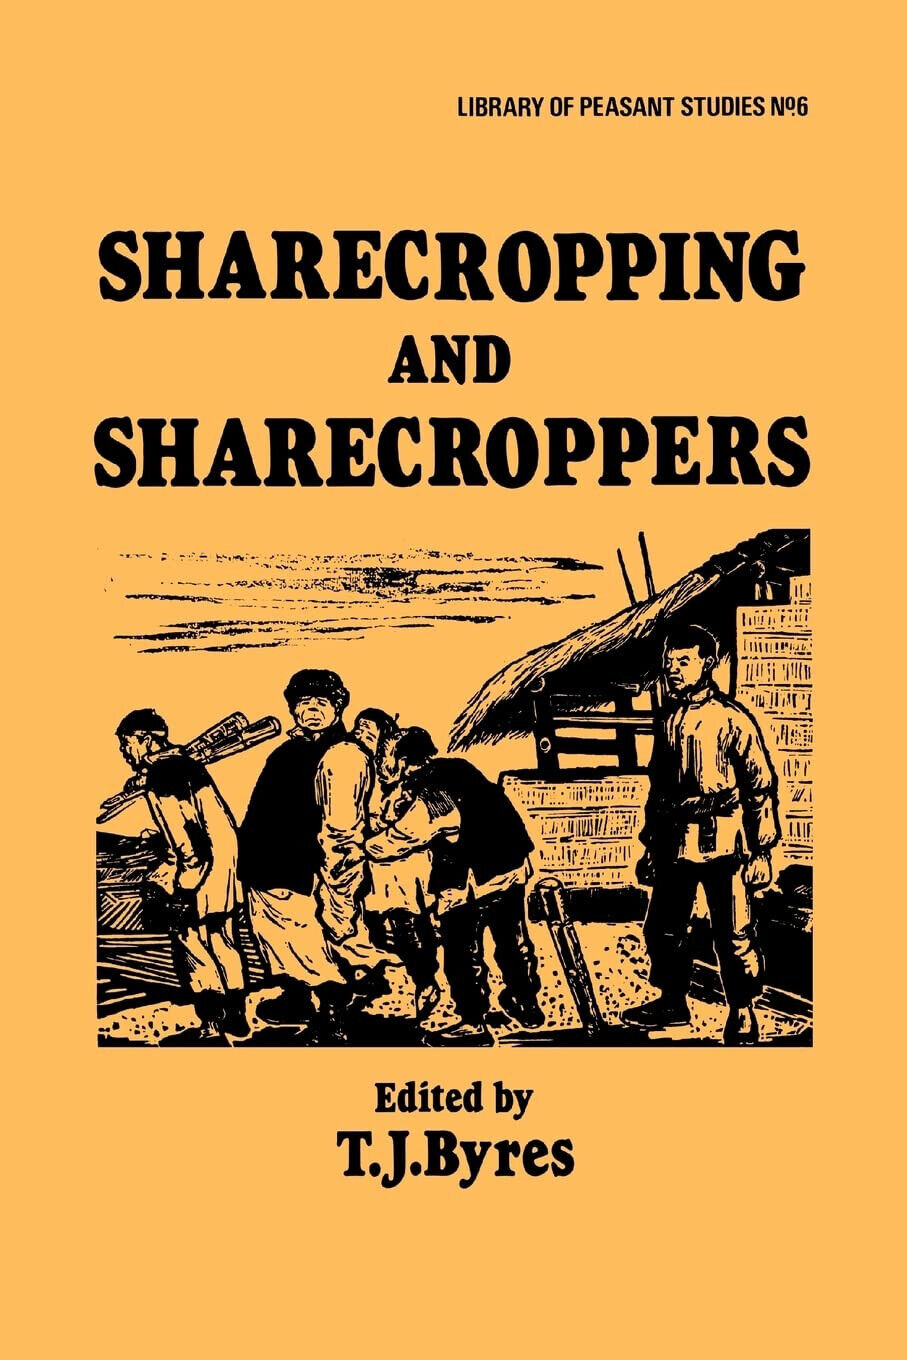 Sharecropping and Sharecroppers - T. J. Byres - Routledge, 1983 libro usato